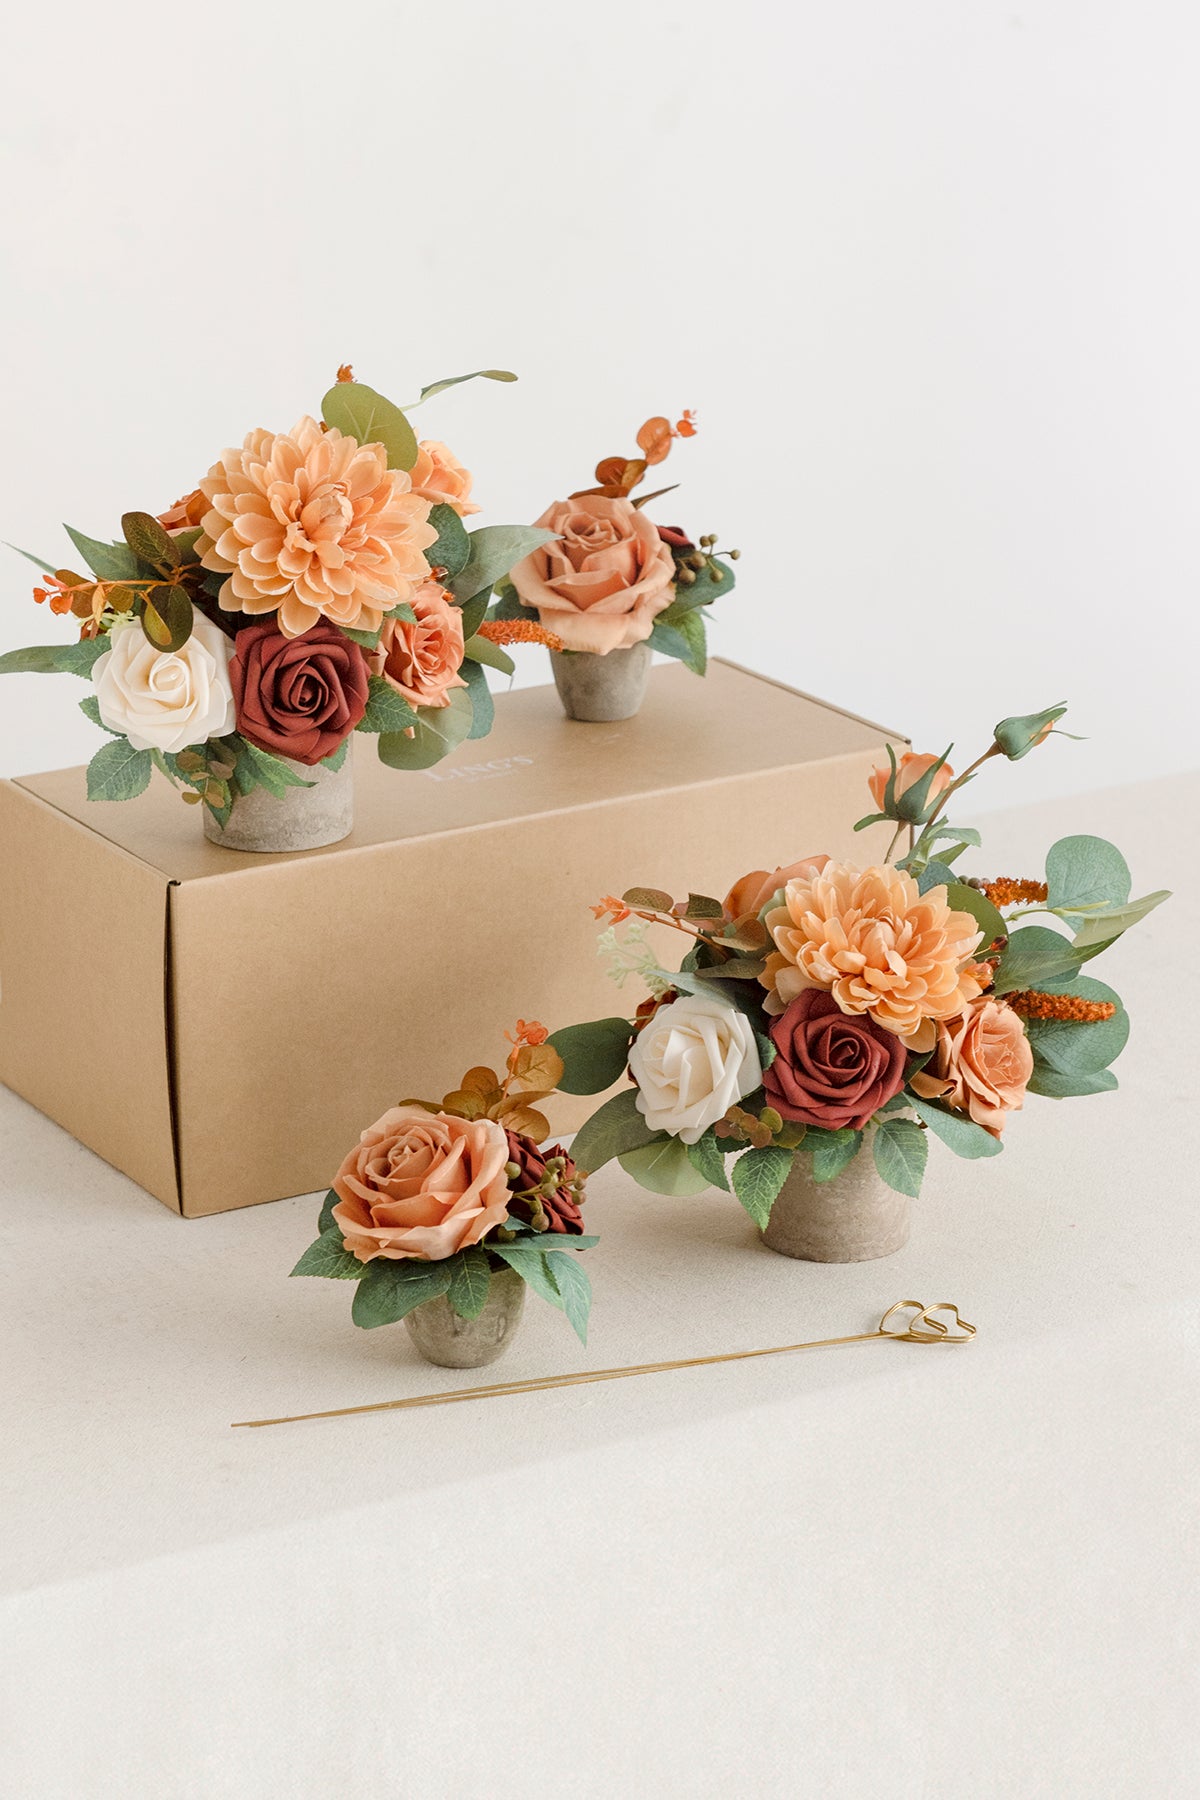 Assorted Floral Centerpiece Set in Sunset Terracotta